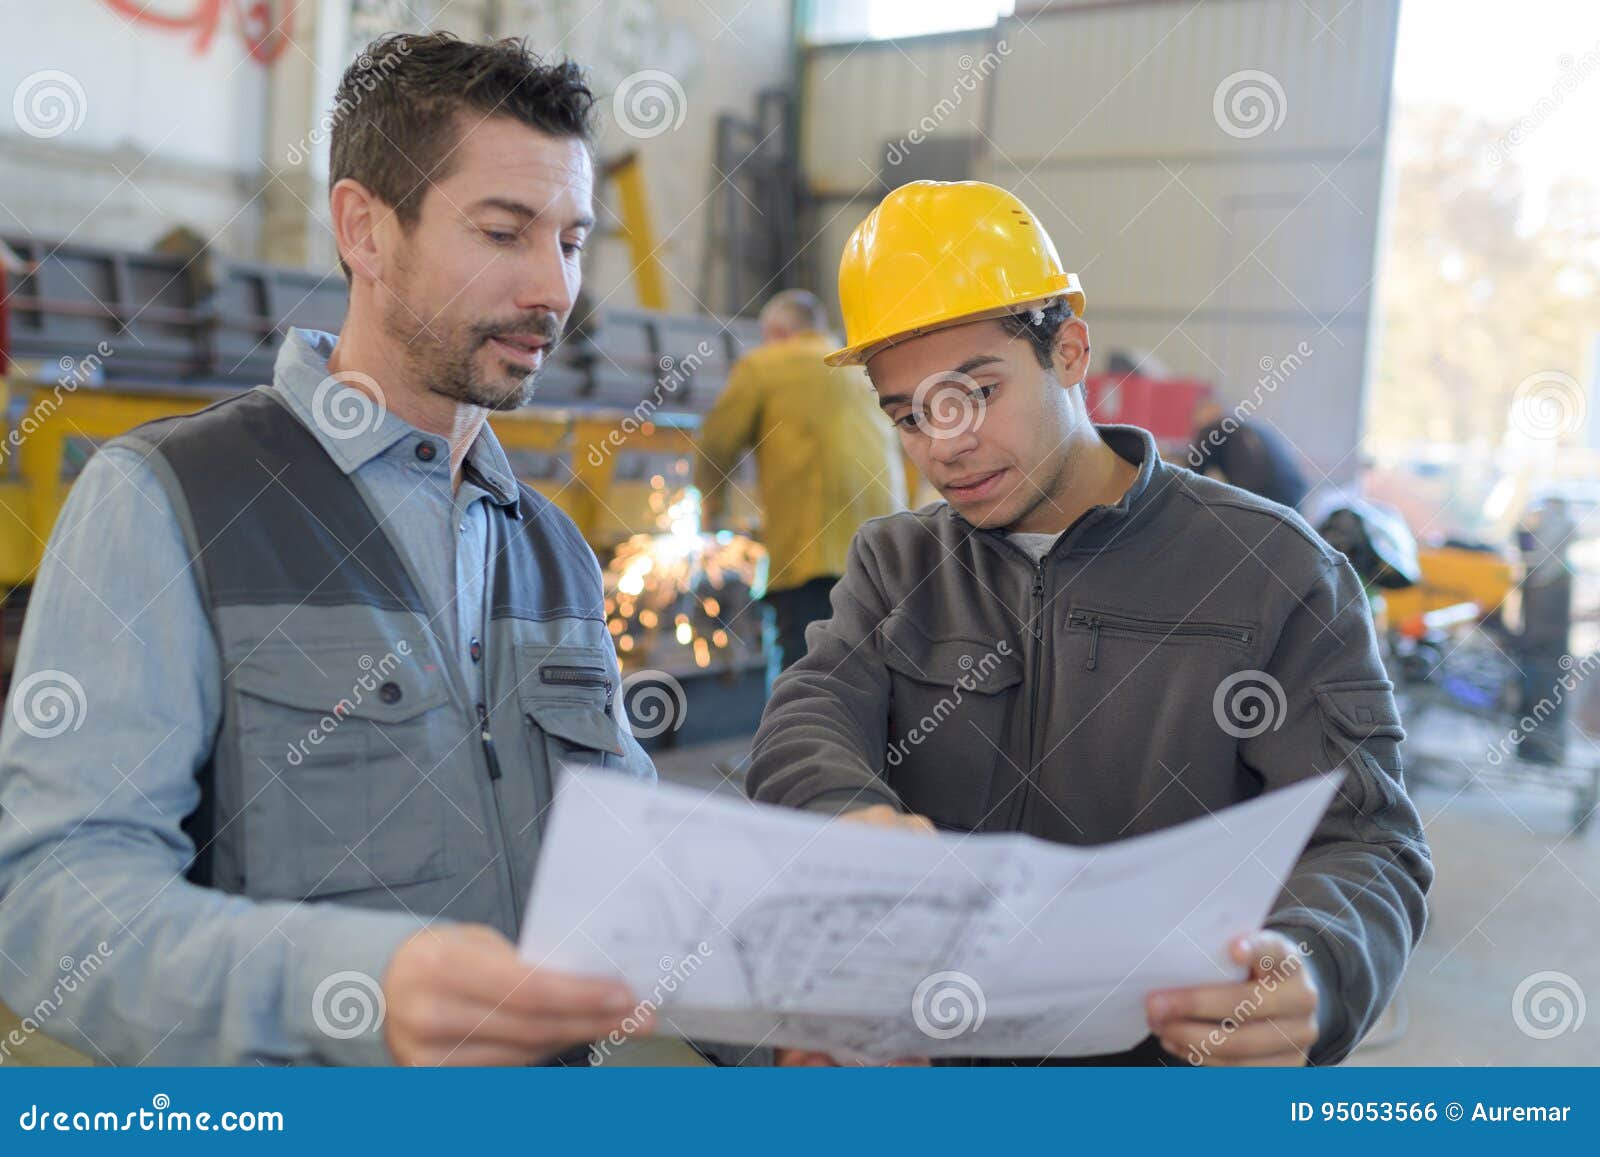 male factory worker and supervisor analyzing plans